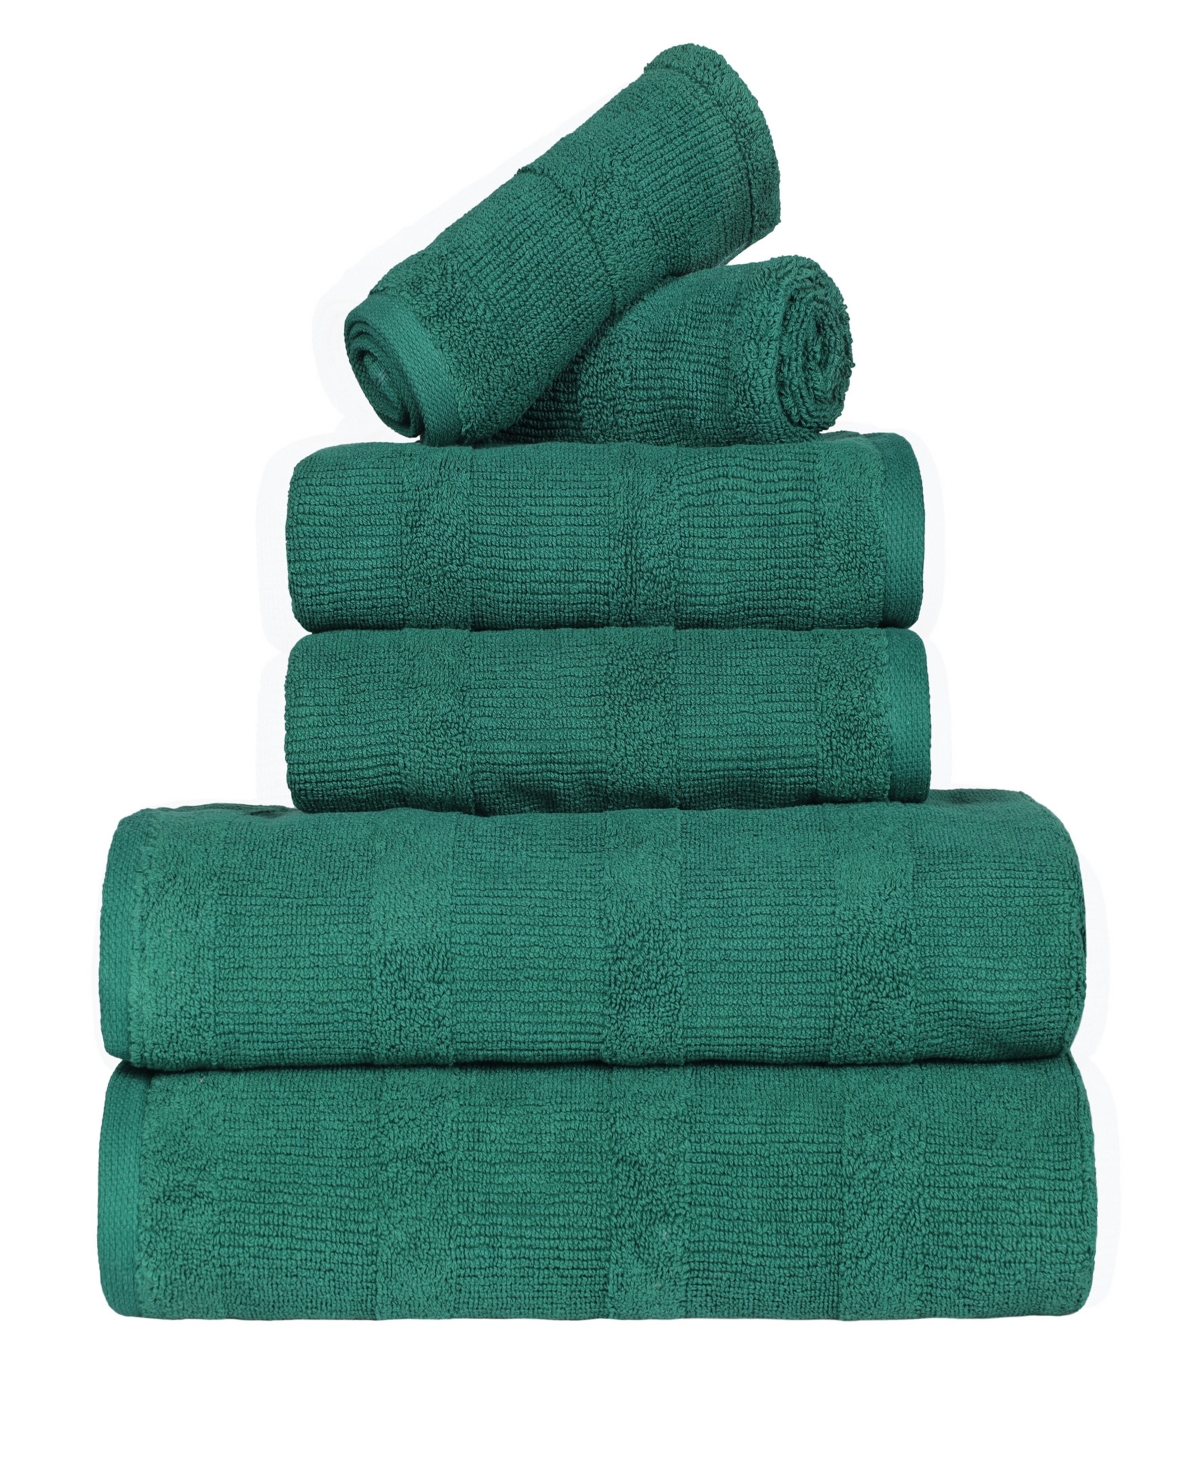 Superior Roma Ribbed Turkish Cotton Quick-dry Solid Assorted Highly Absorbent Towel 6 Piece Set In Evergreen